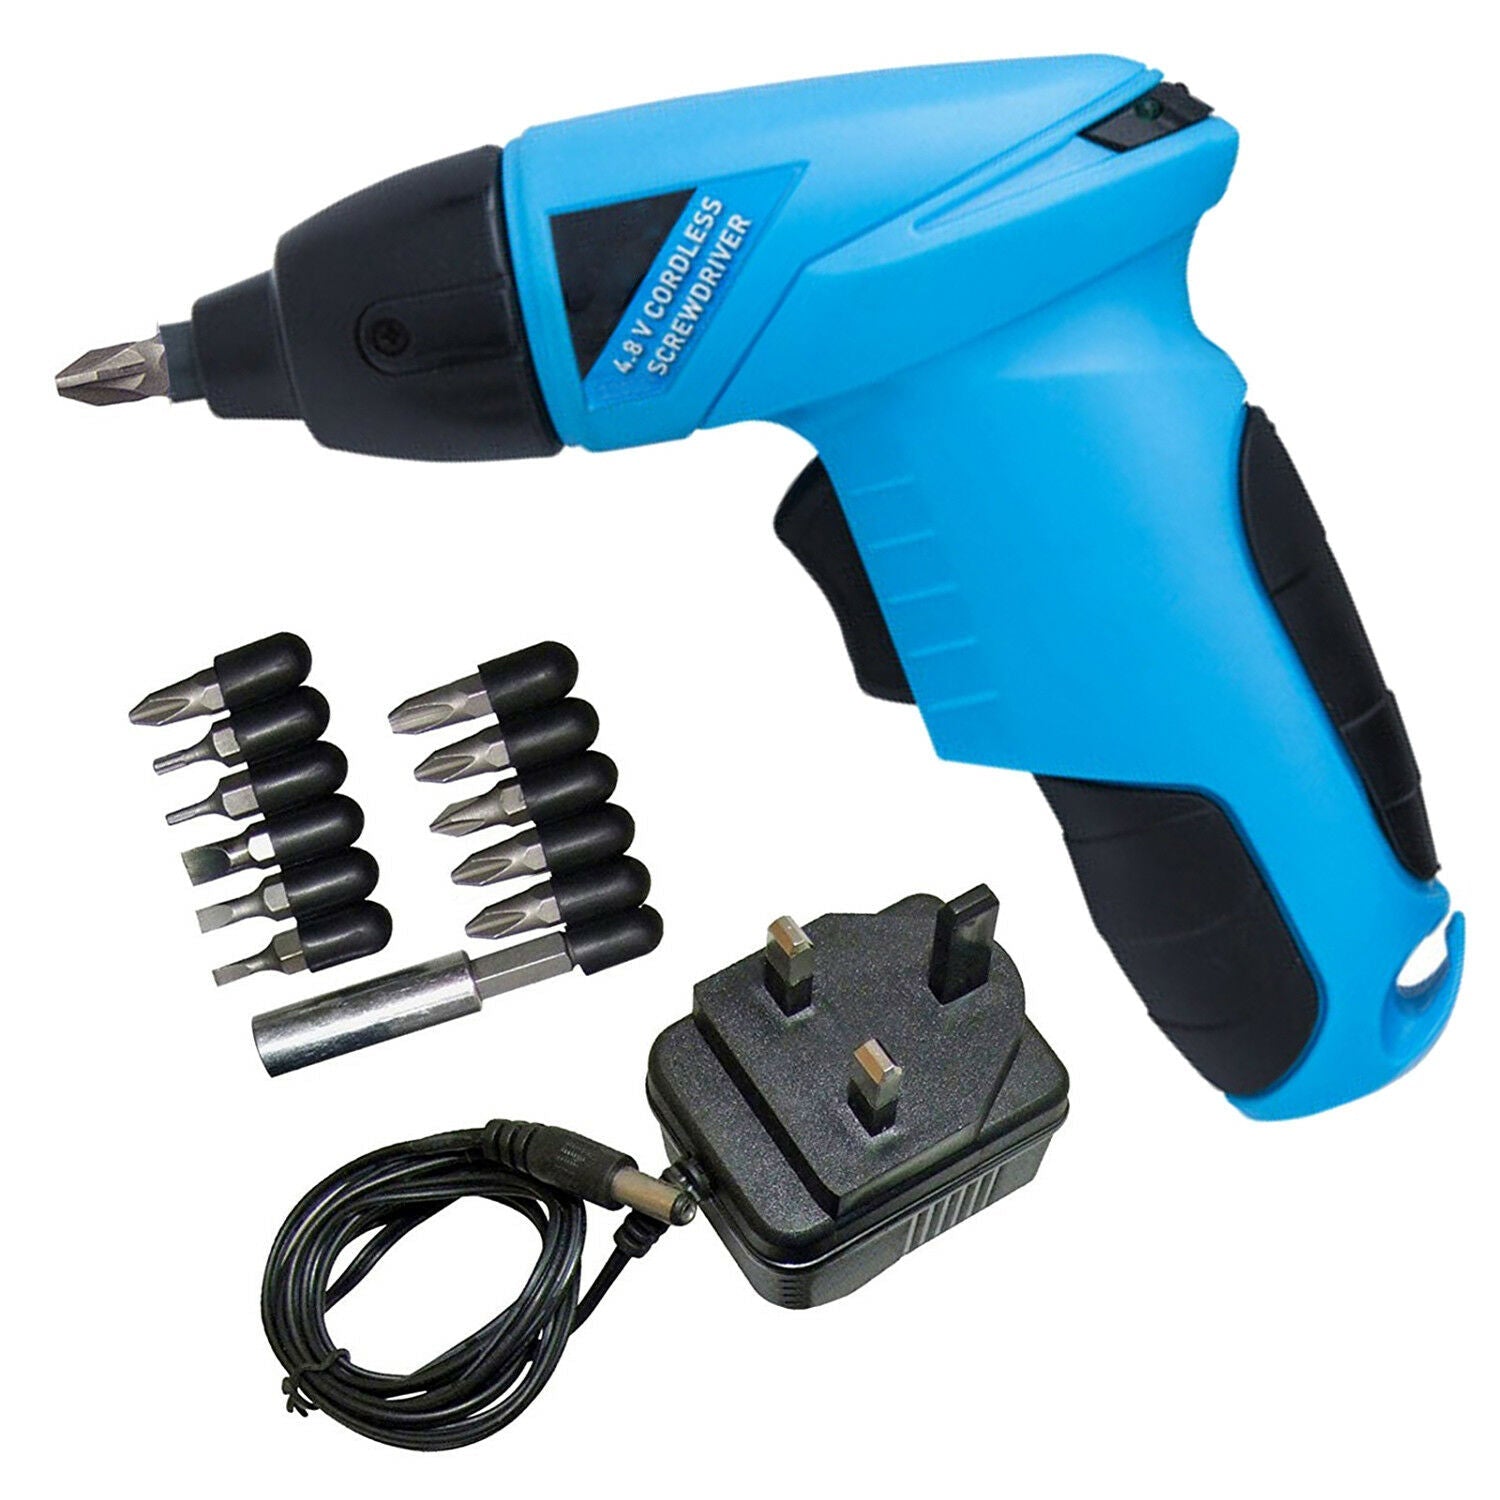 Mini Cordless Rechargeable Electric Screwdriver & 20 Pocket Double Tool Belt